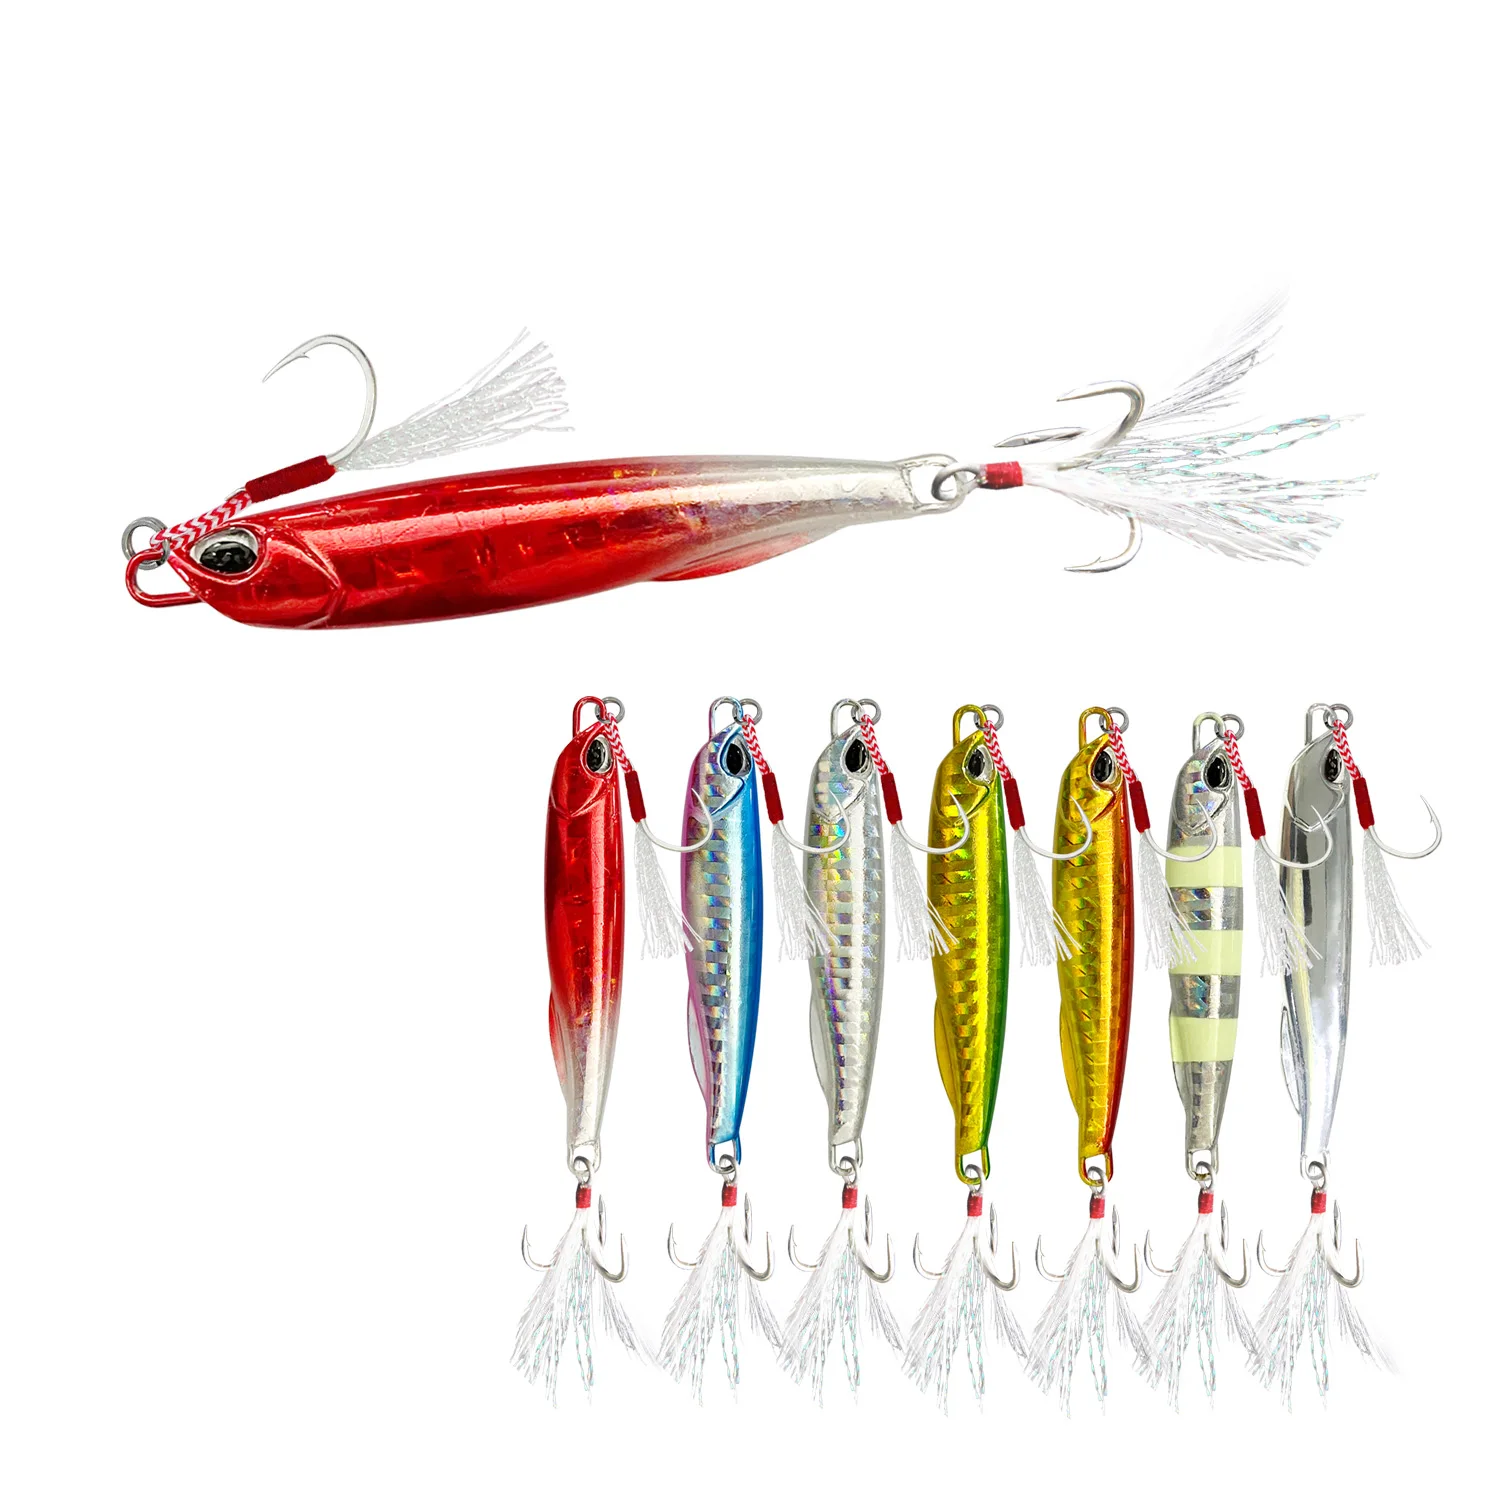 

Artificial Baits Shore Slow Jigging Hard Lead Bass Fishing Lures 10g/15g/20g/25g/30g/40g/60g Hard Lure WIth High quality hook, 7 color